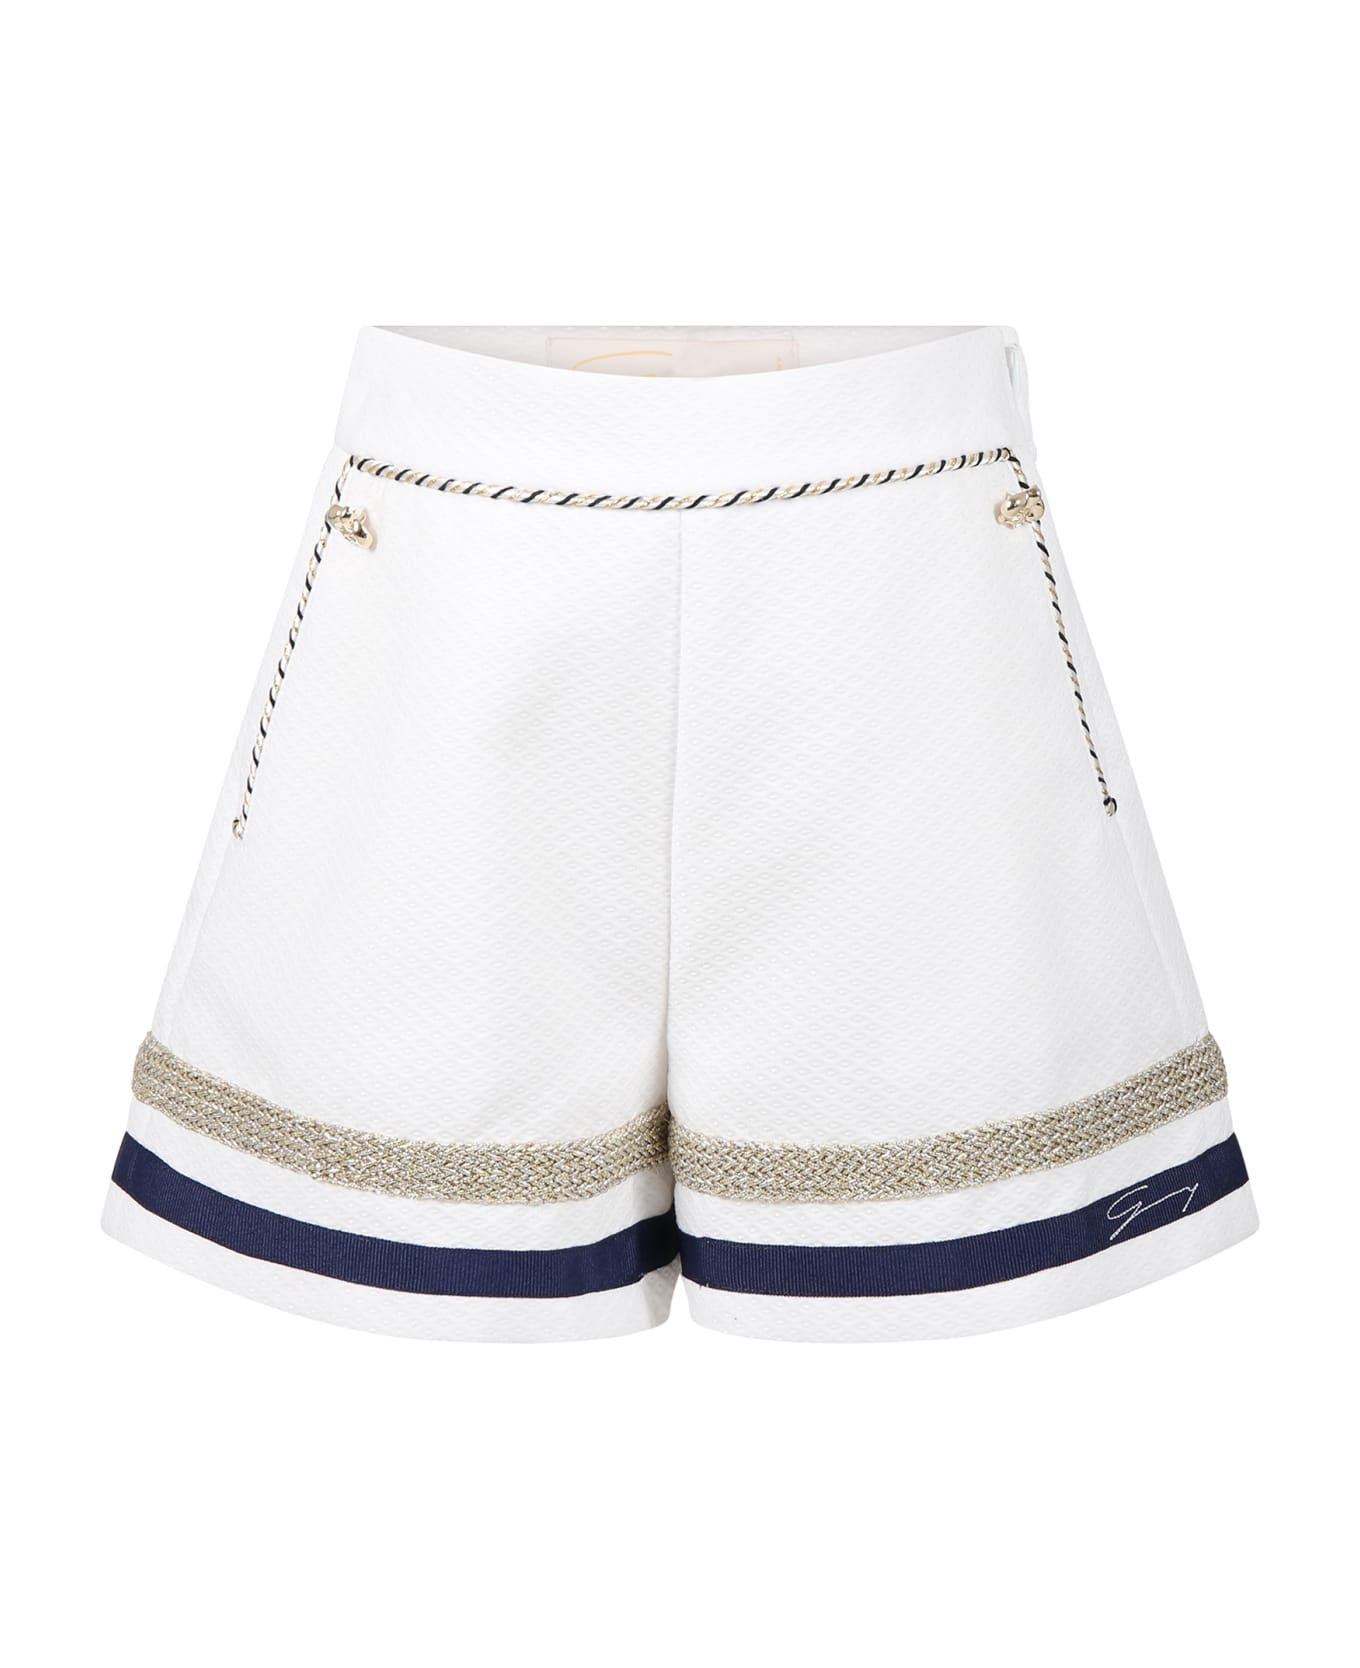 Genny White Shorts For Girl With Blue And Lurex Details - White ボトムス